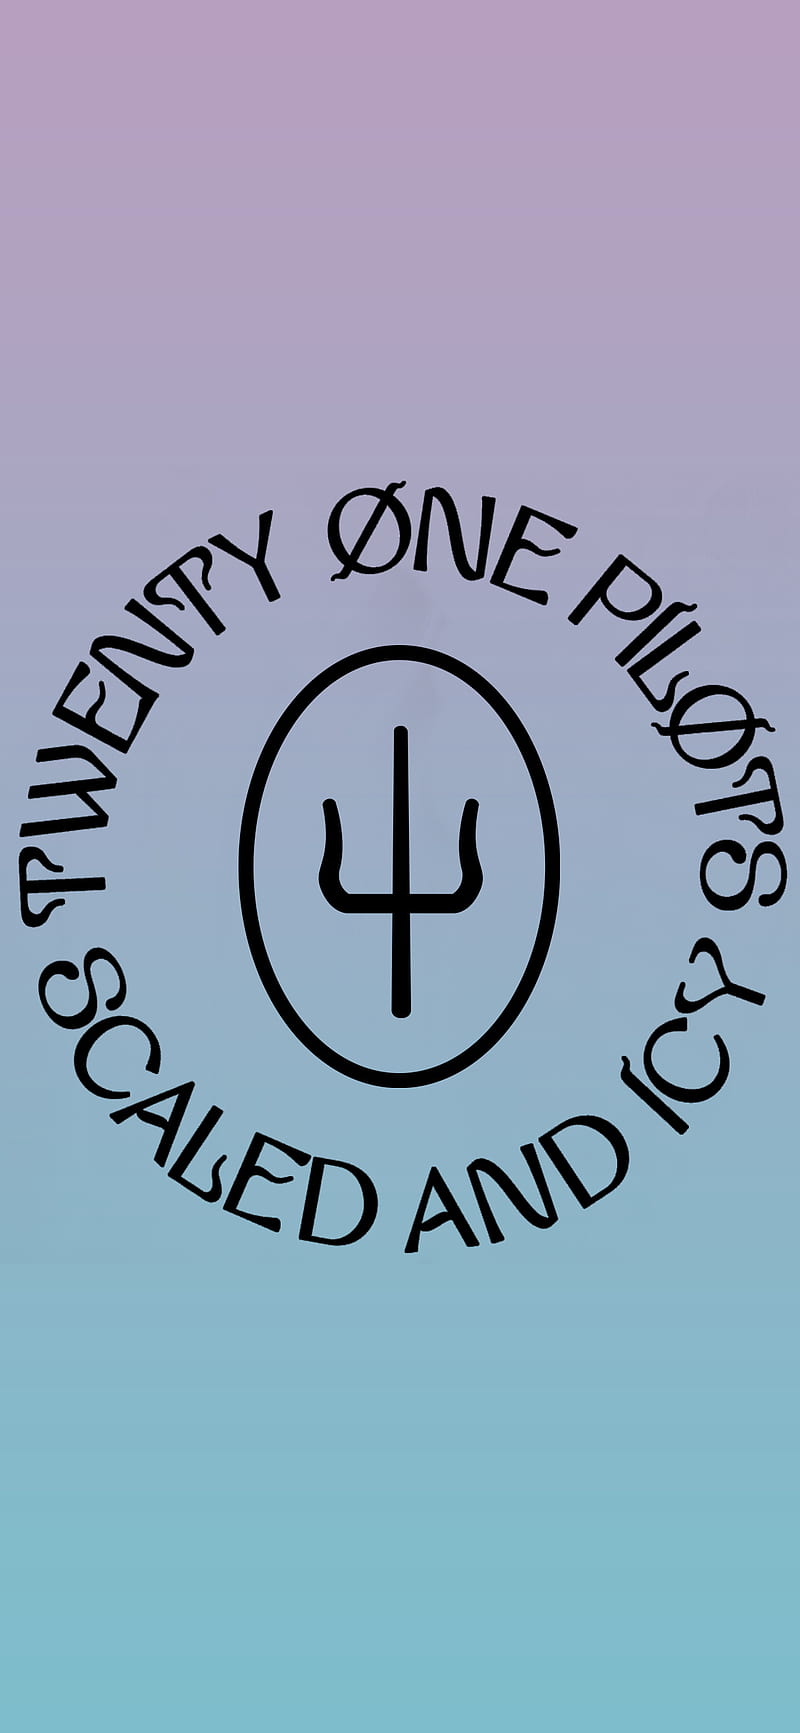 1080P free download Twenty one pilots, logo, scaled and icy, HD phone